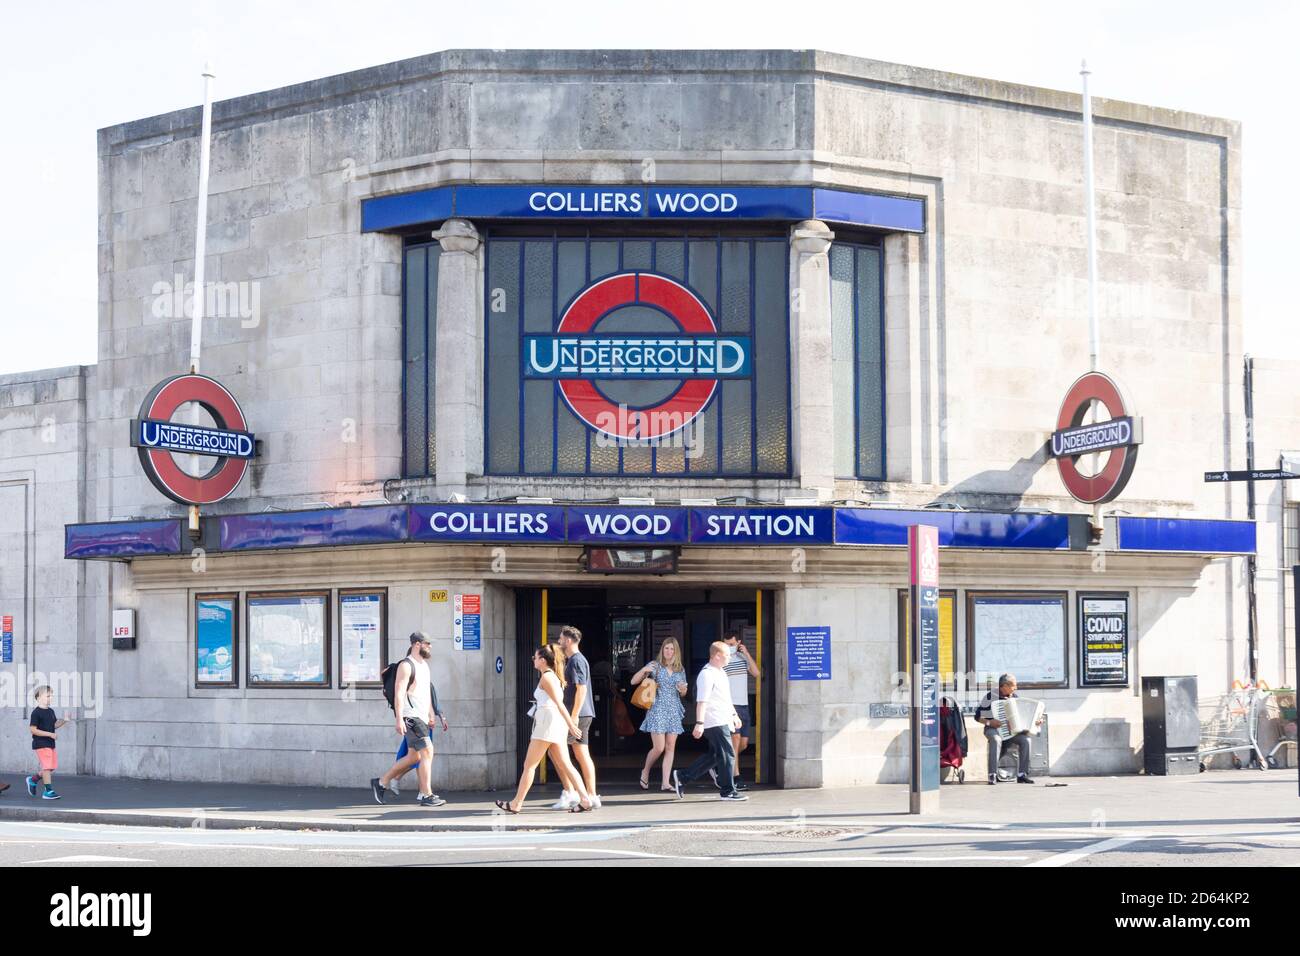 Colliers Wood Underground Station High Resolution Stock Photography and  Images - Alamy